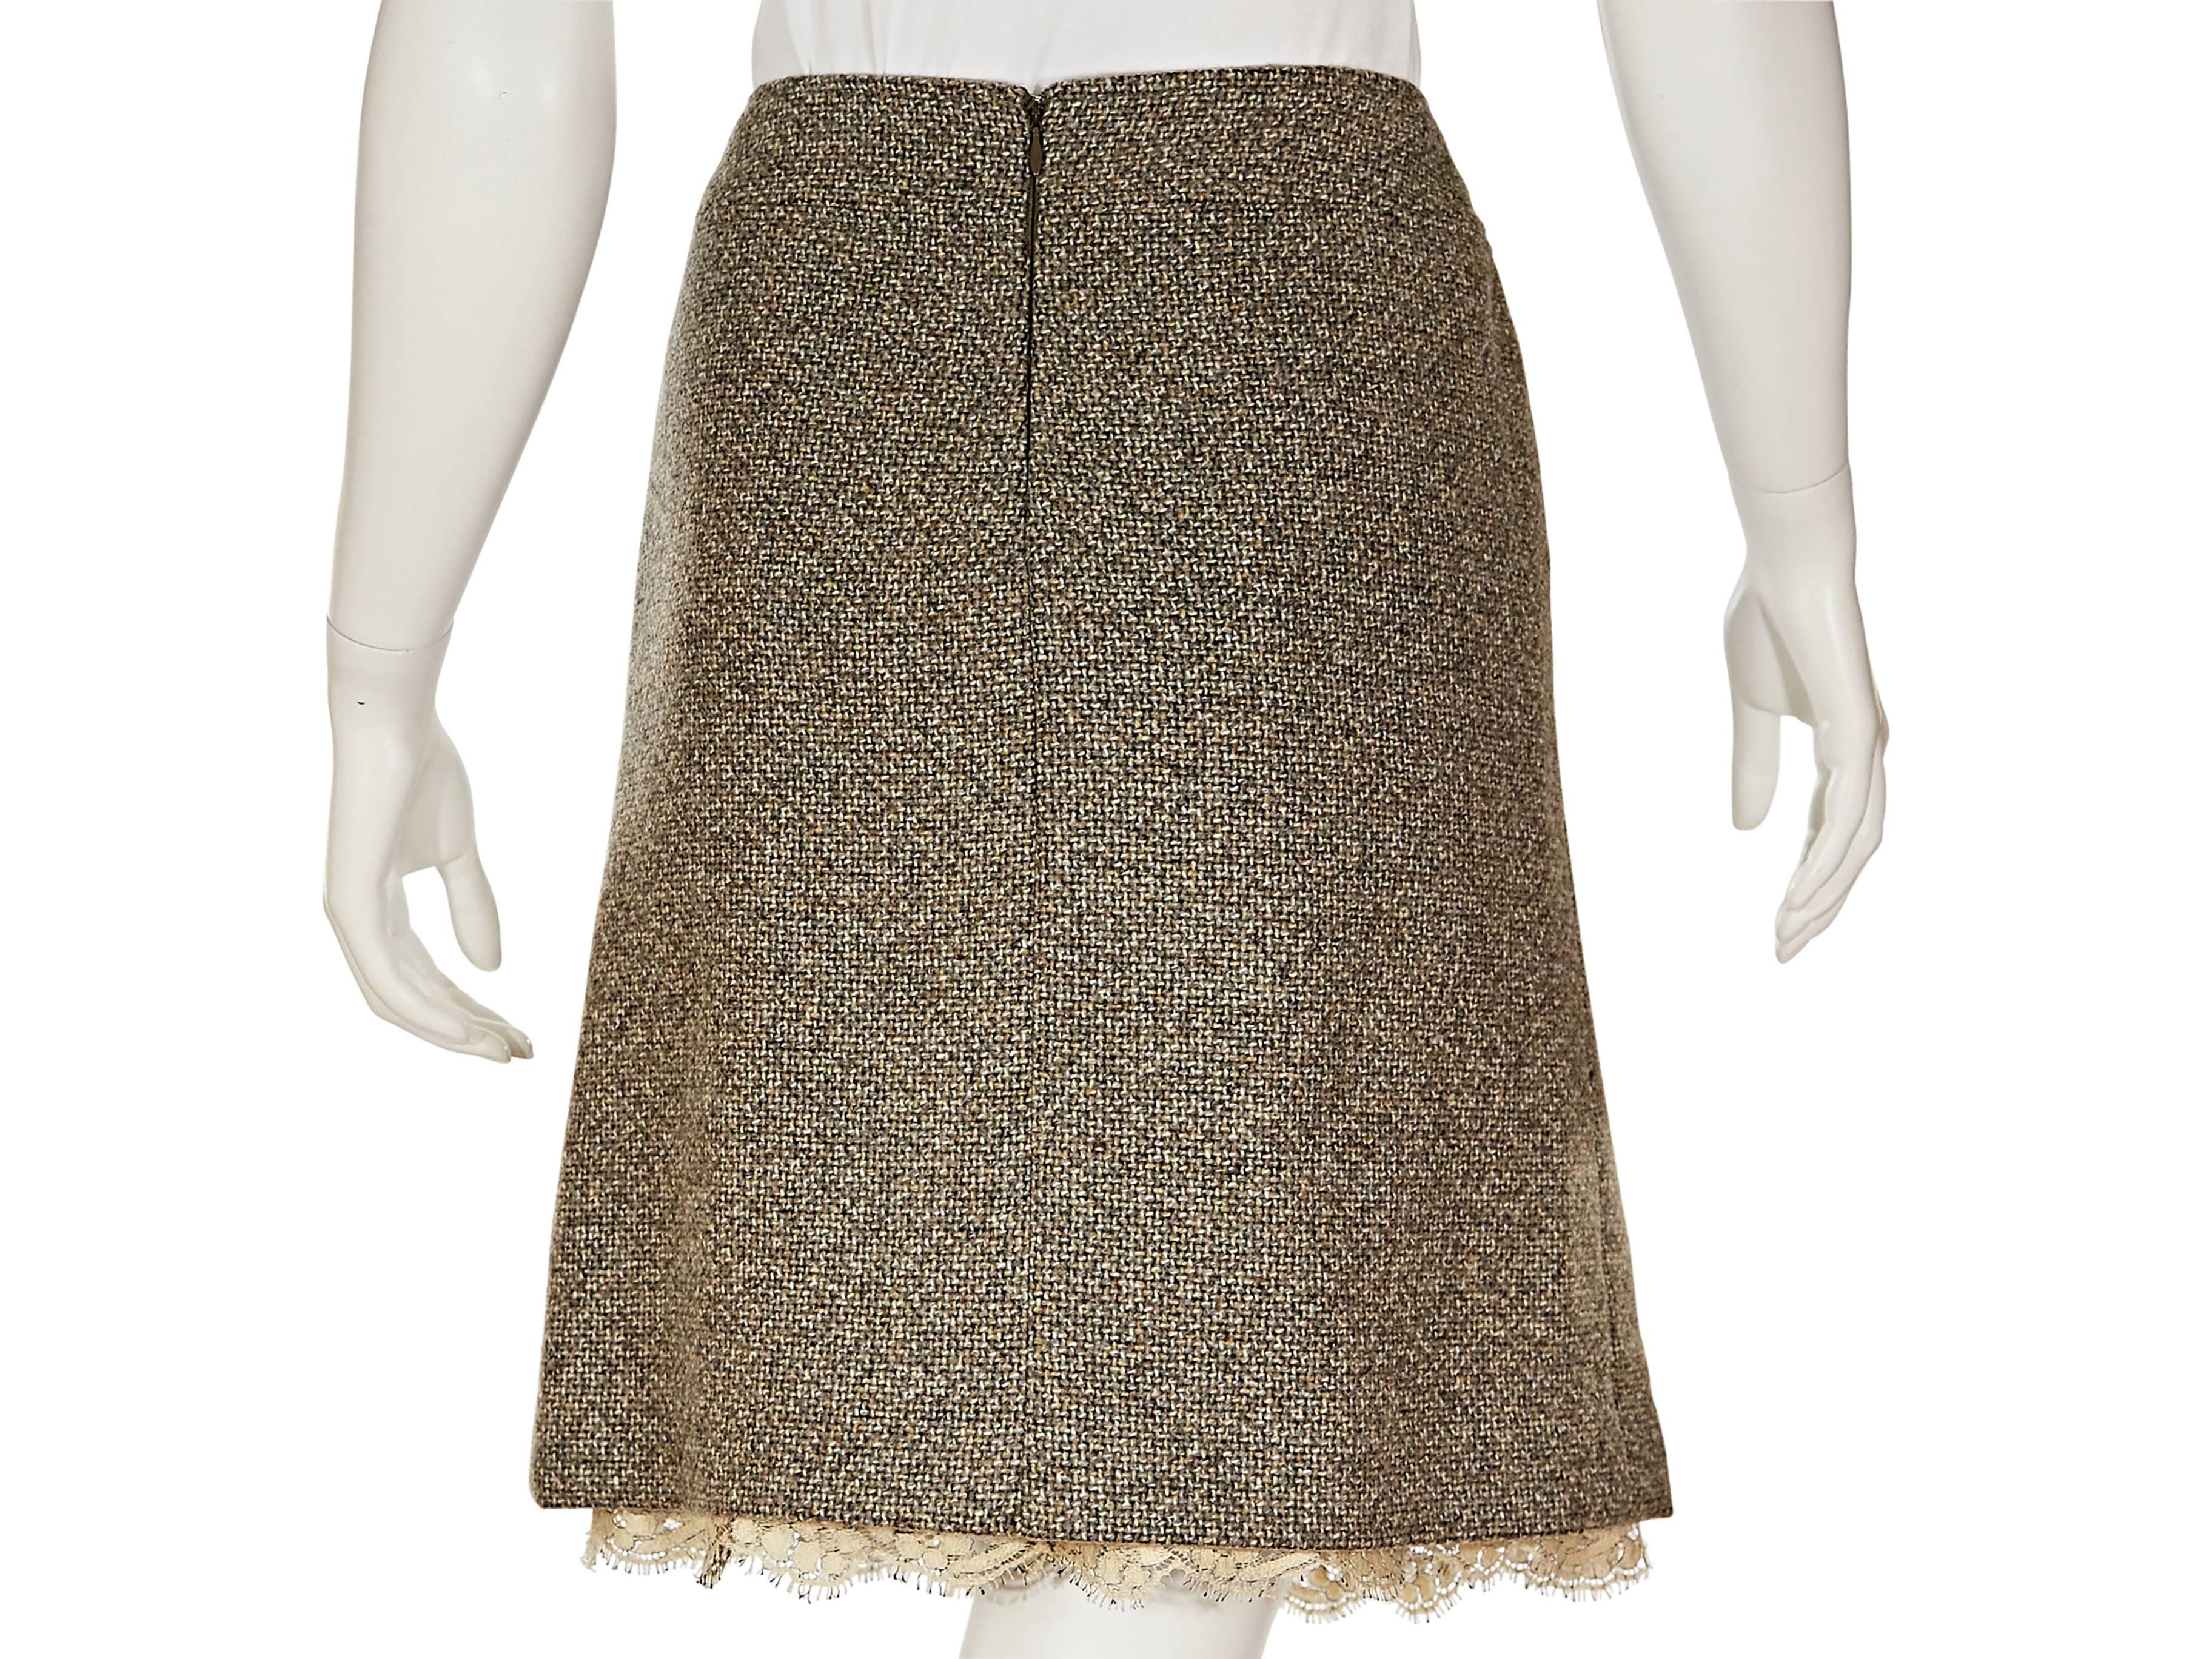 Grey tweed A-line skirt by Chanel.  Banded waist with goldtone logo charm.  Concealed back zip closure.  Lace hemline. 

European sizing is converted to US size at New York based store.